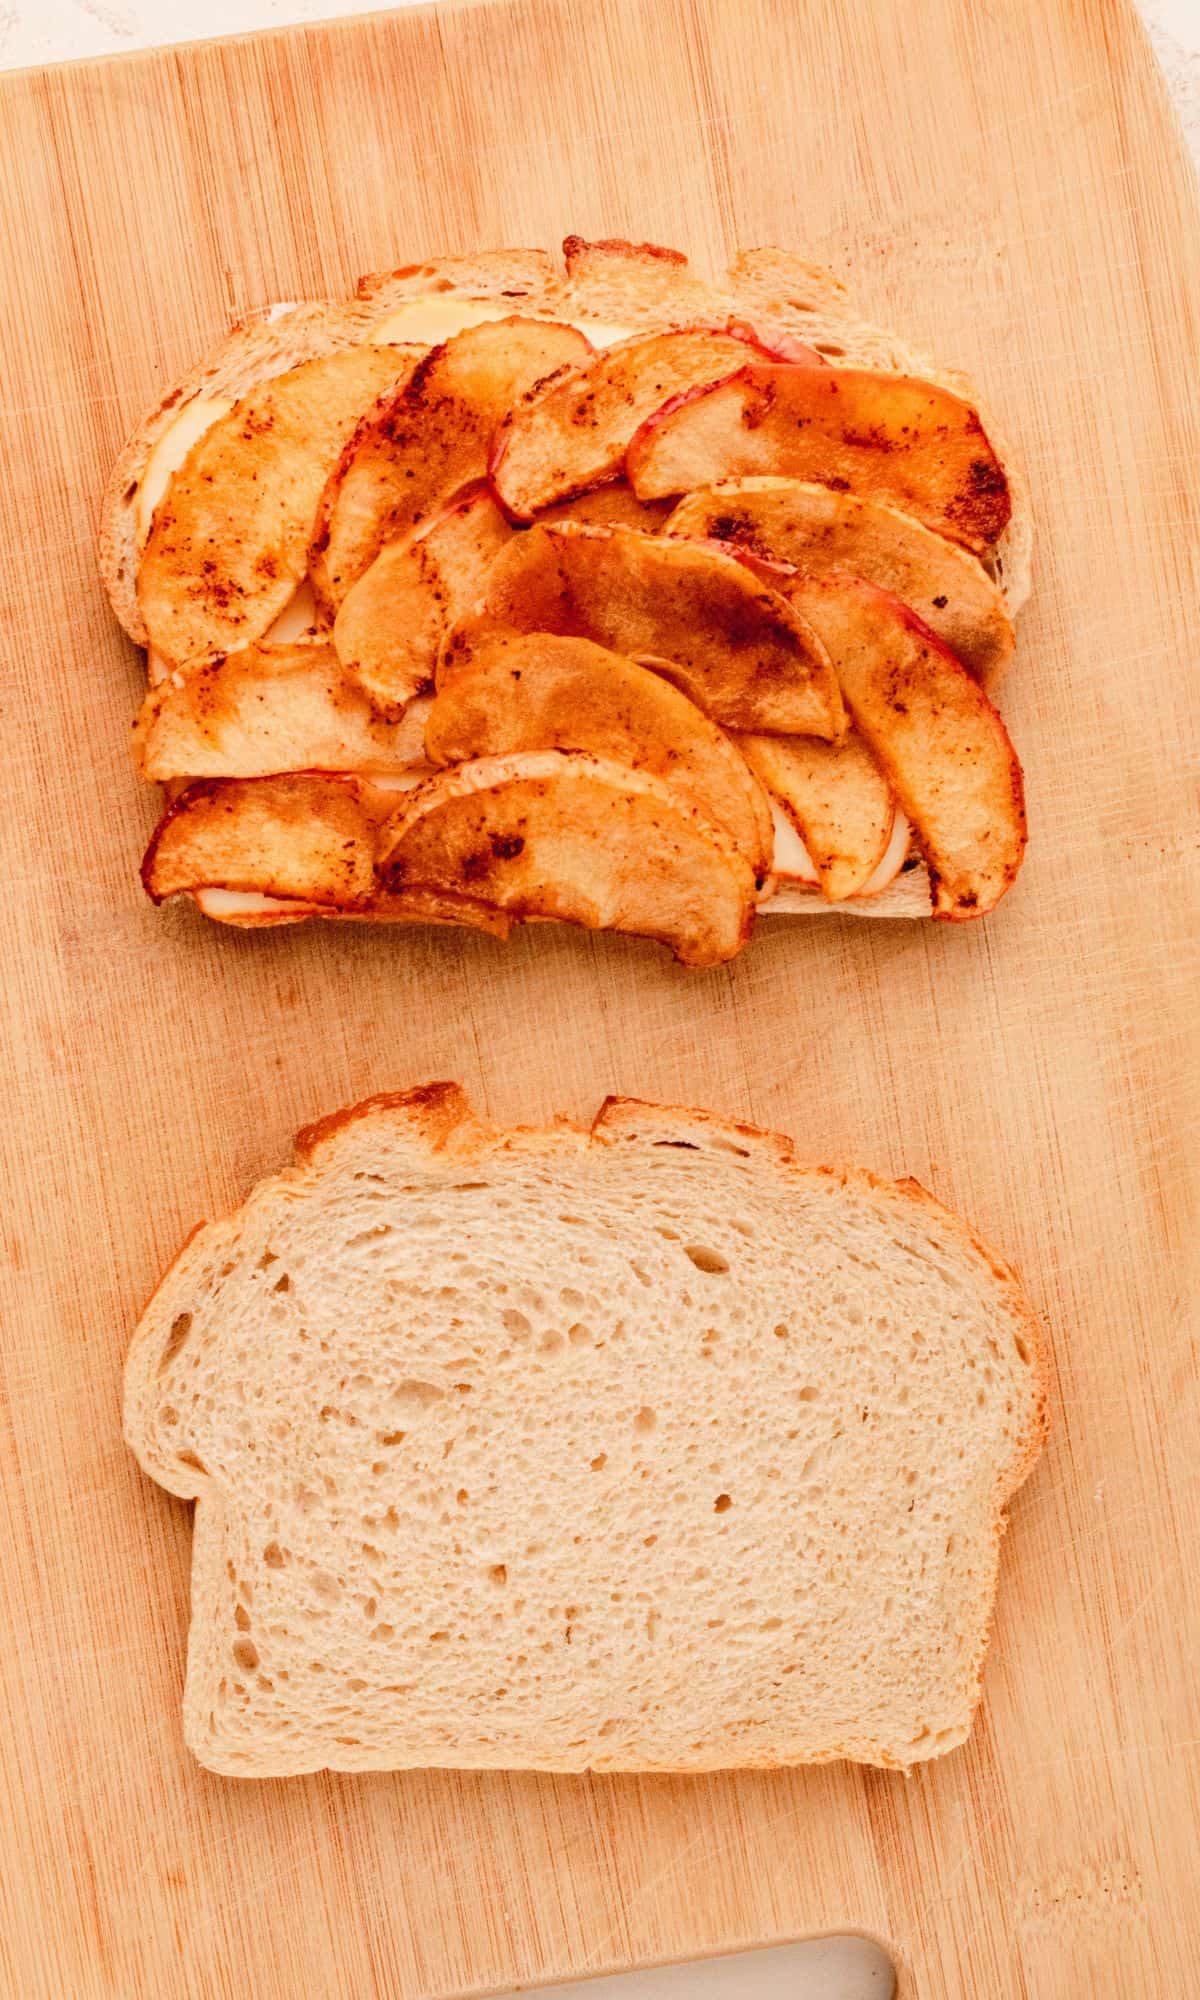 Roasted apple and chicken panini preparation on a cutting board.